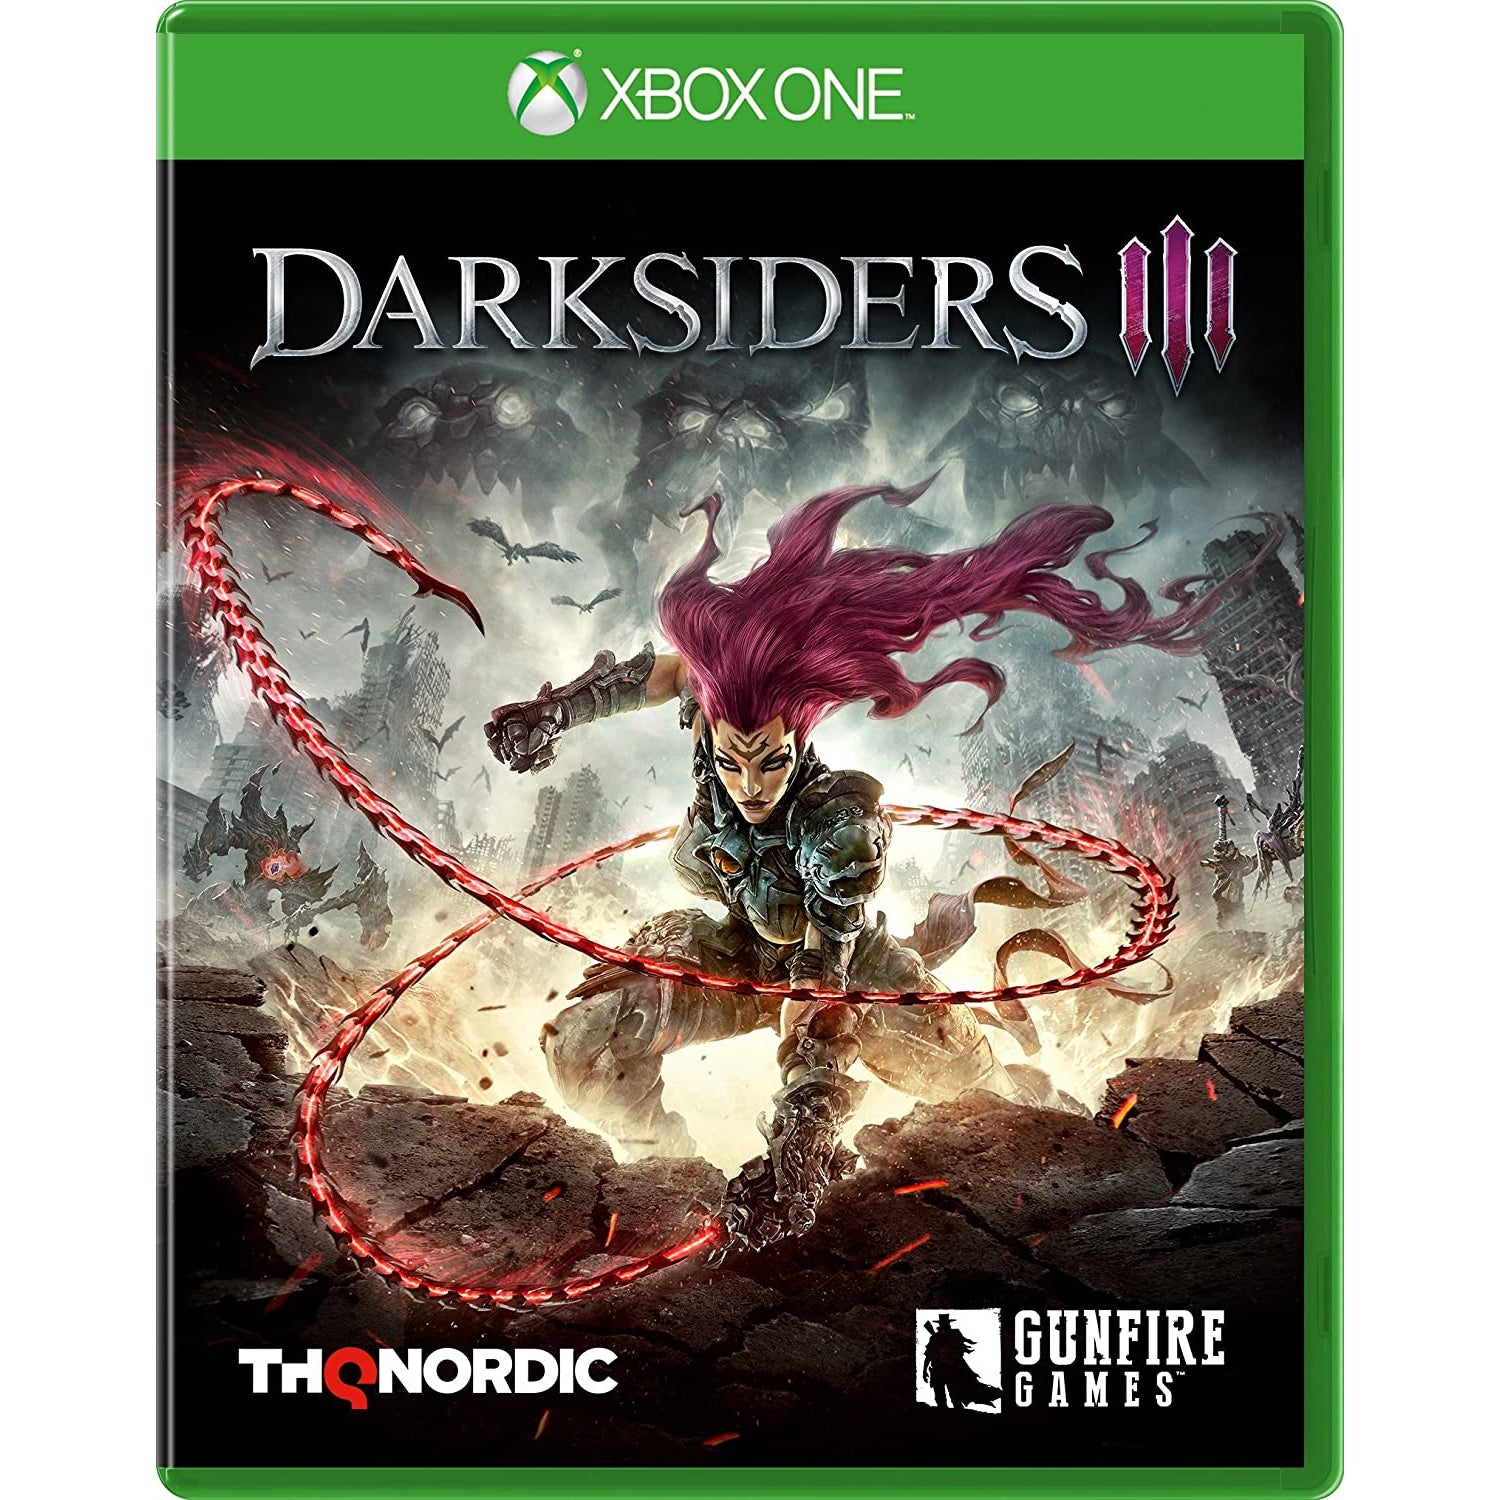 Darksiders 3 (Xbox One) - Good Condition